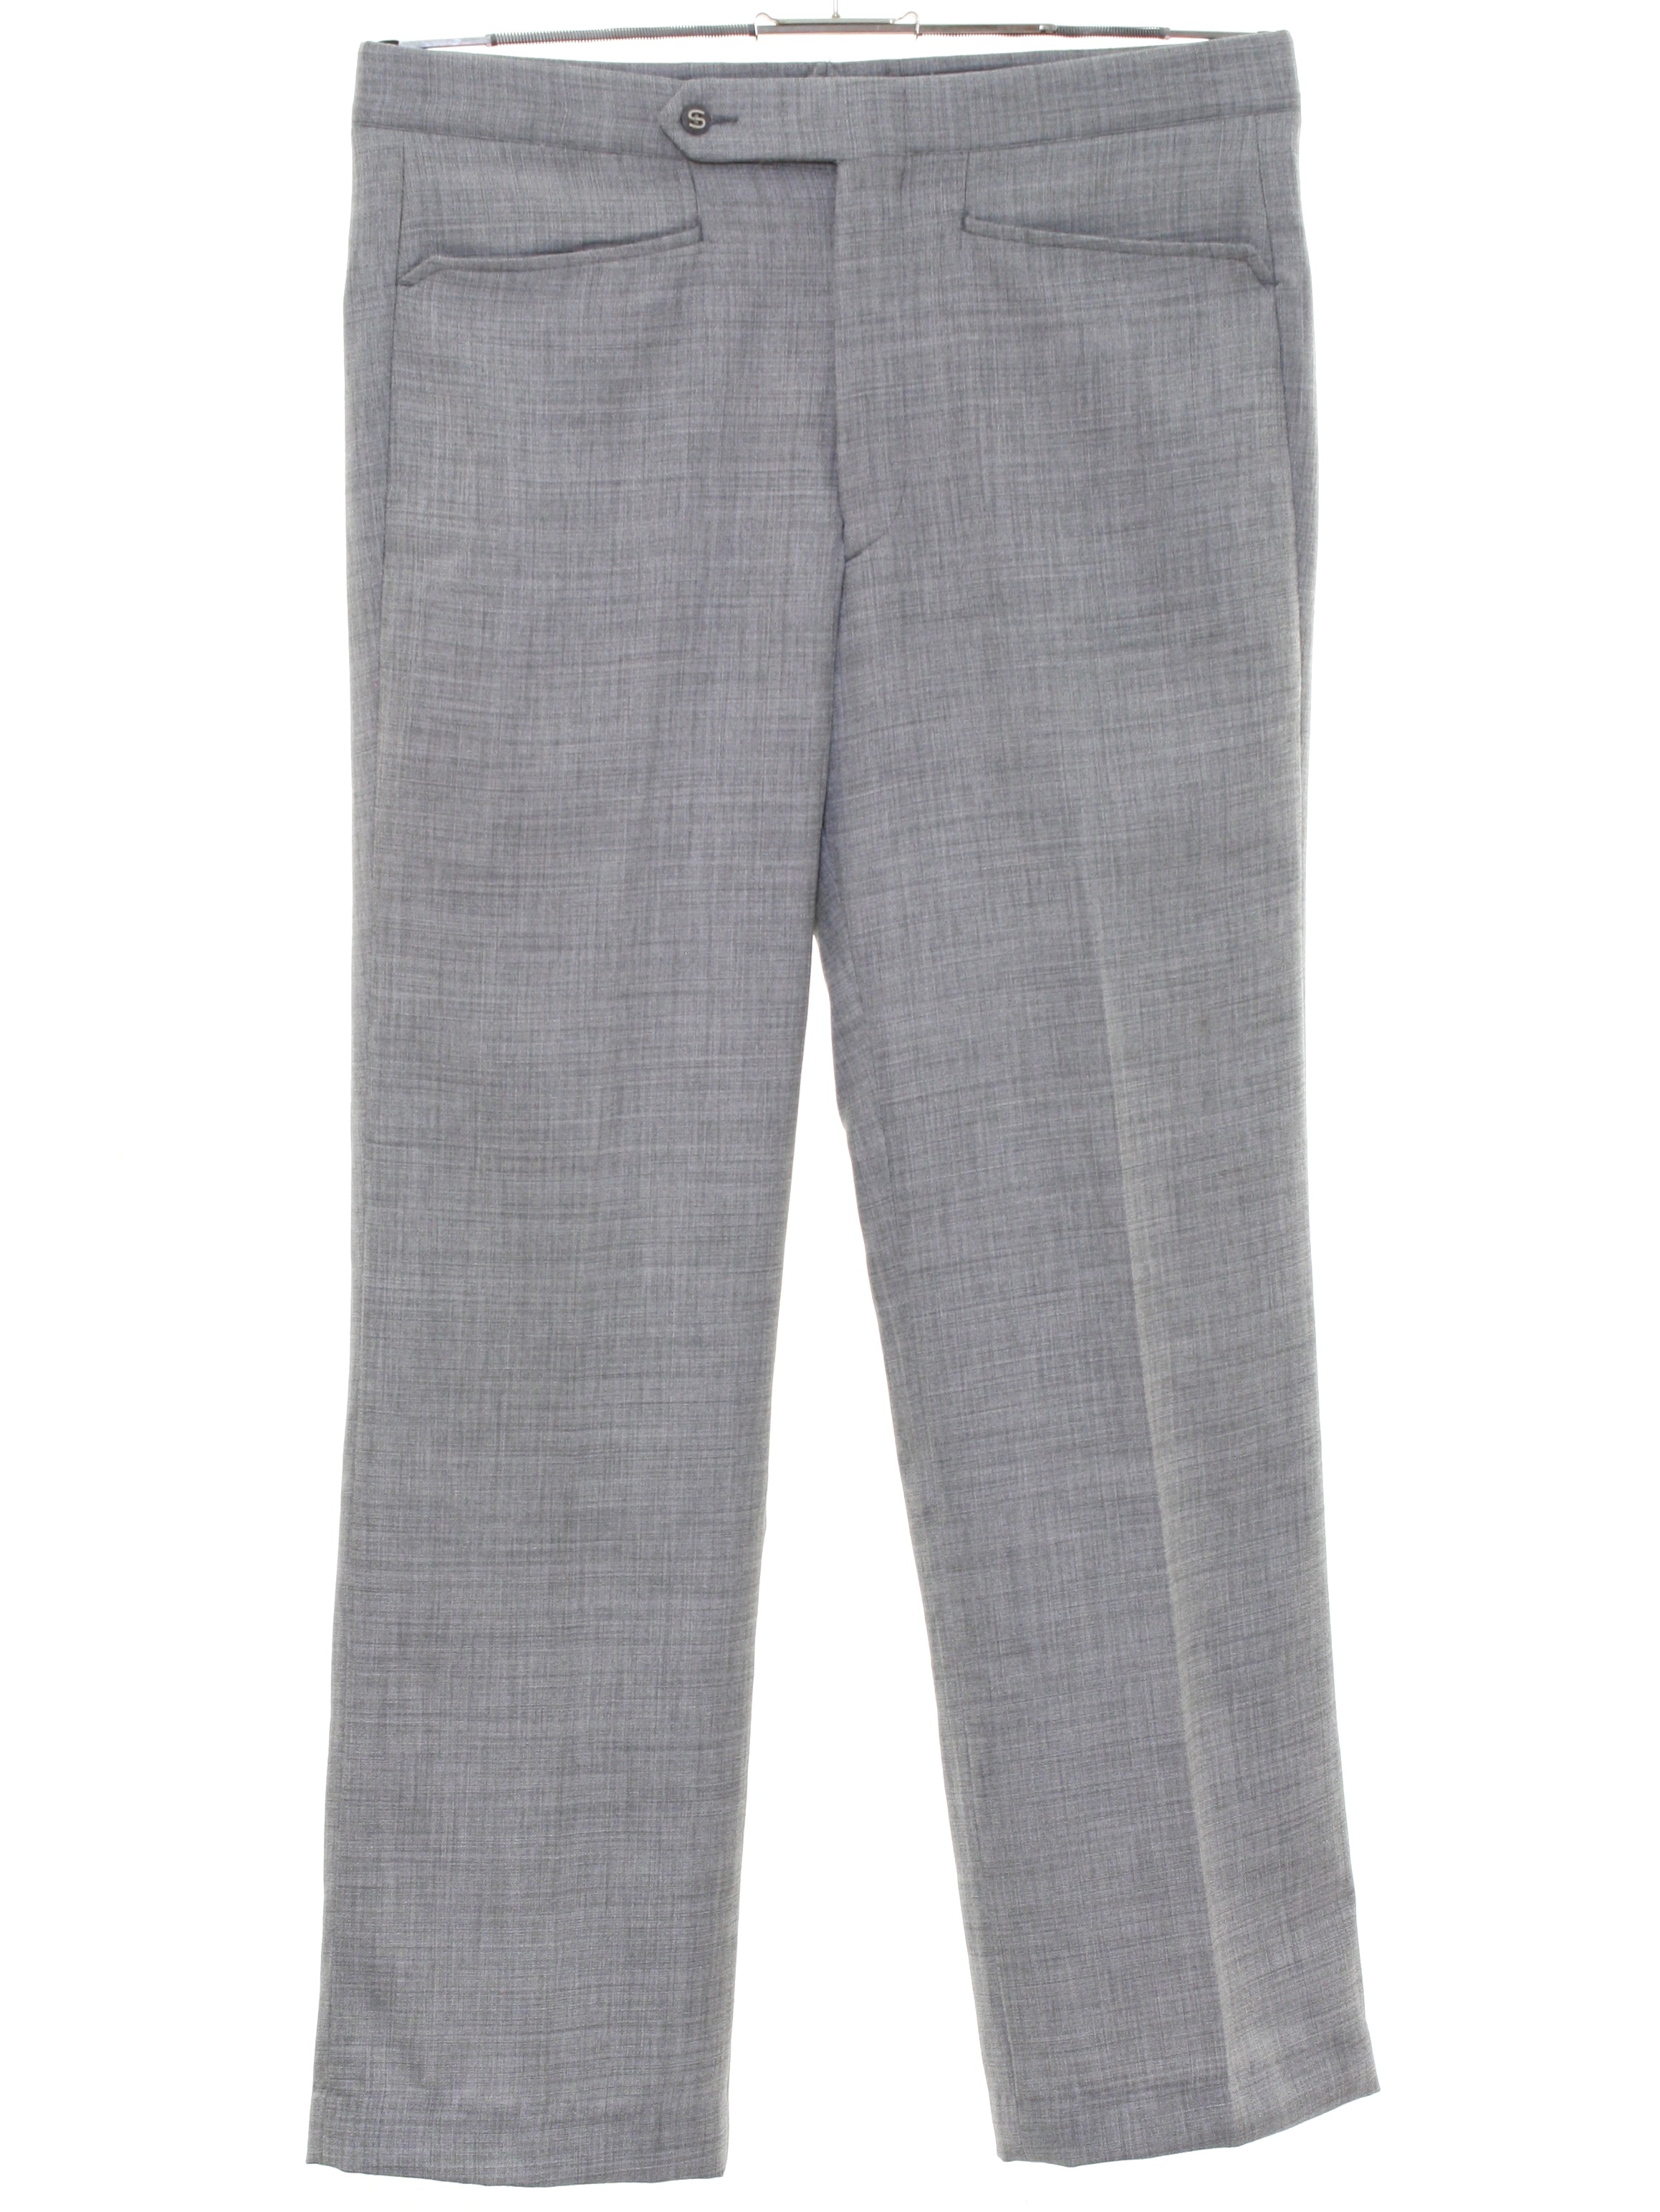 Retro 70's Flared Pants / Flares: 70s -Sansabelt- Mens heathered grey solid  colored polyester flat front flared leisure pants with cuffless hem, front  slanted top entry pockets, one rear inset open pocket